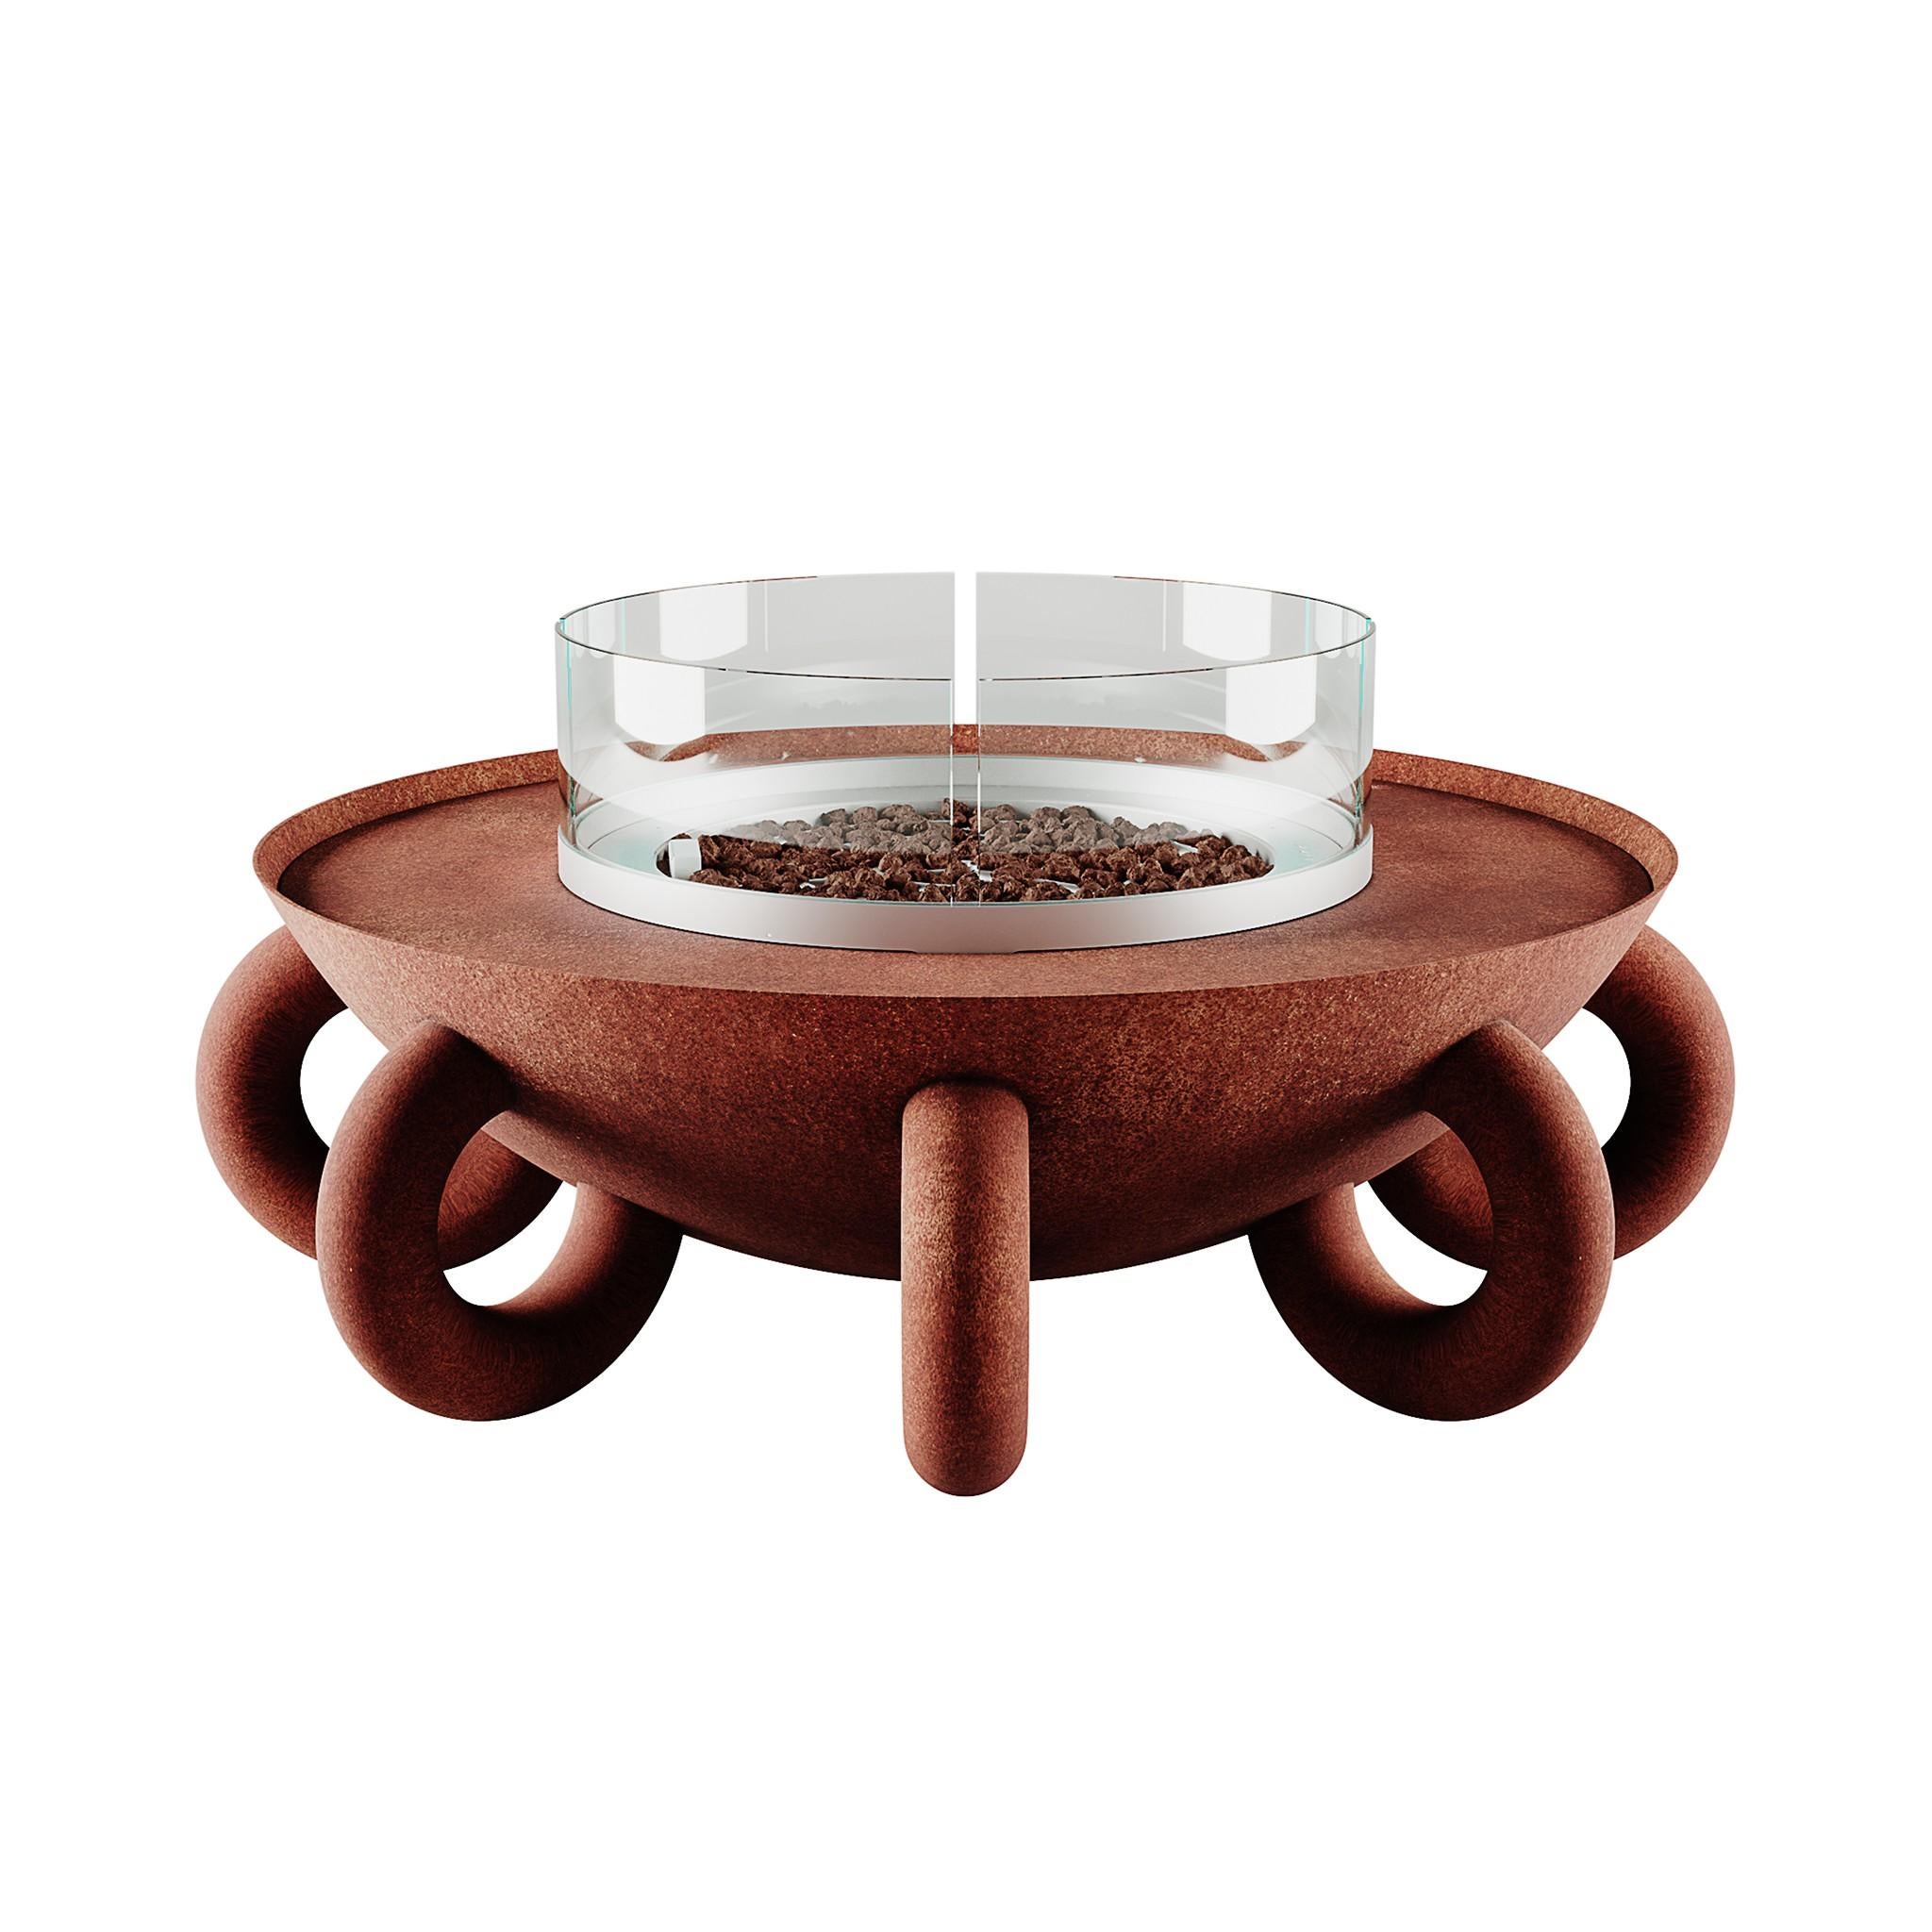 Modern Outdoor Round Fire Pit Red Textured Stainless Steel In New Condition For Sale In Porto, PT